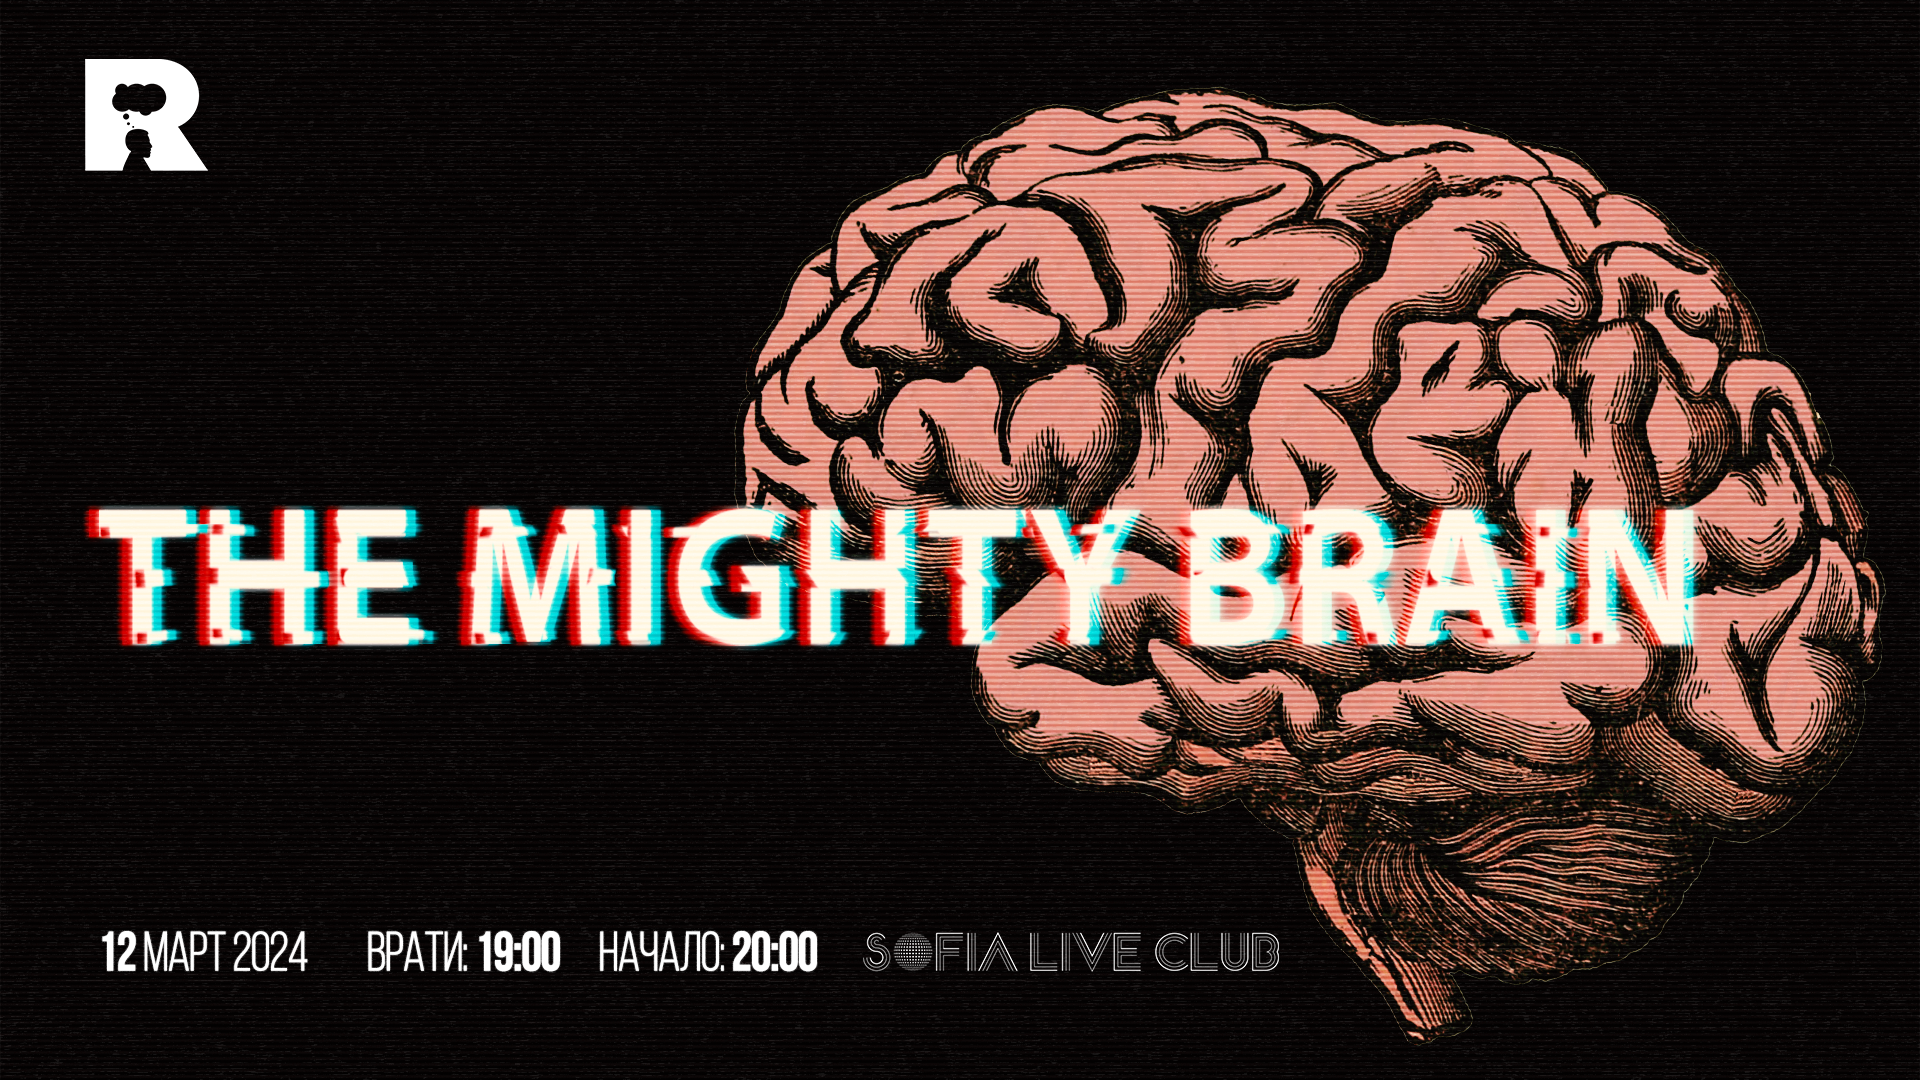 The Mighty brain